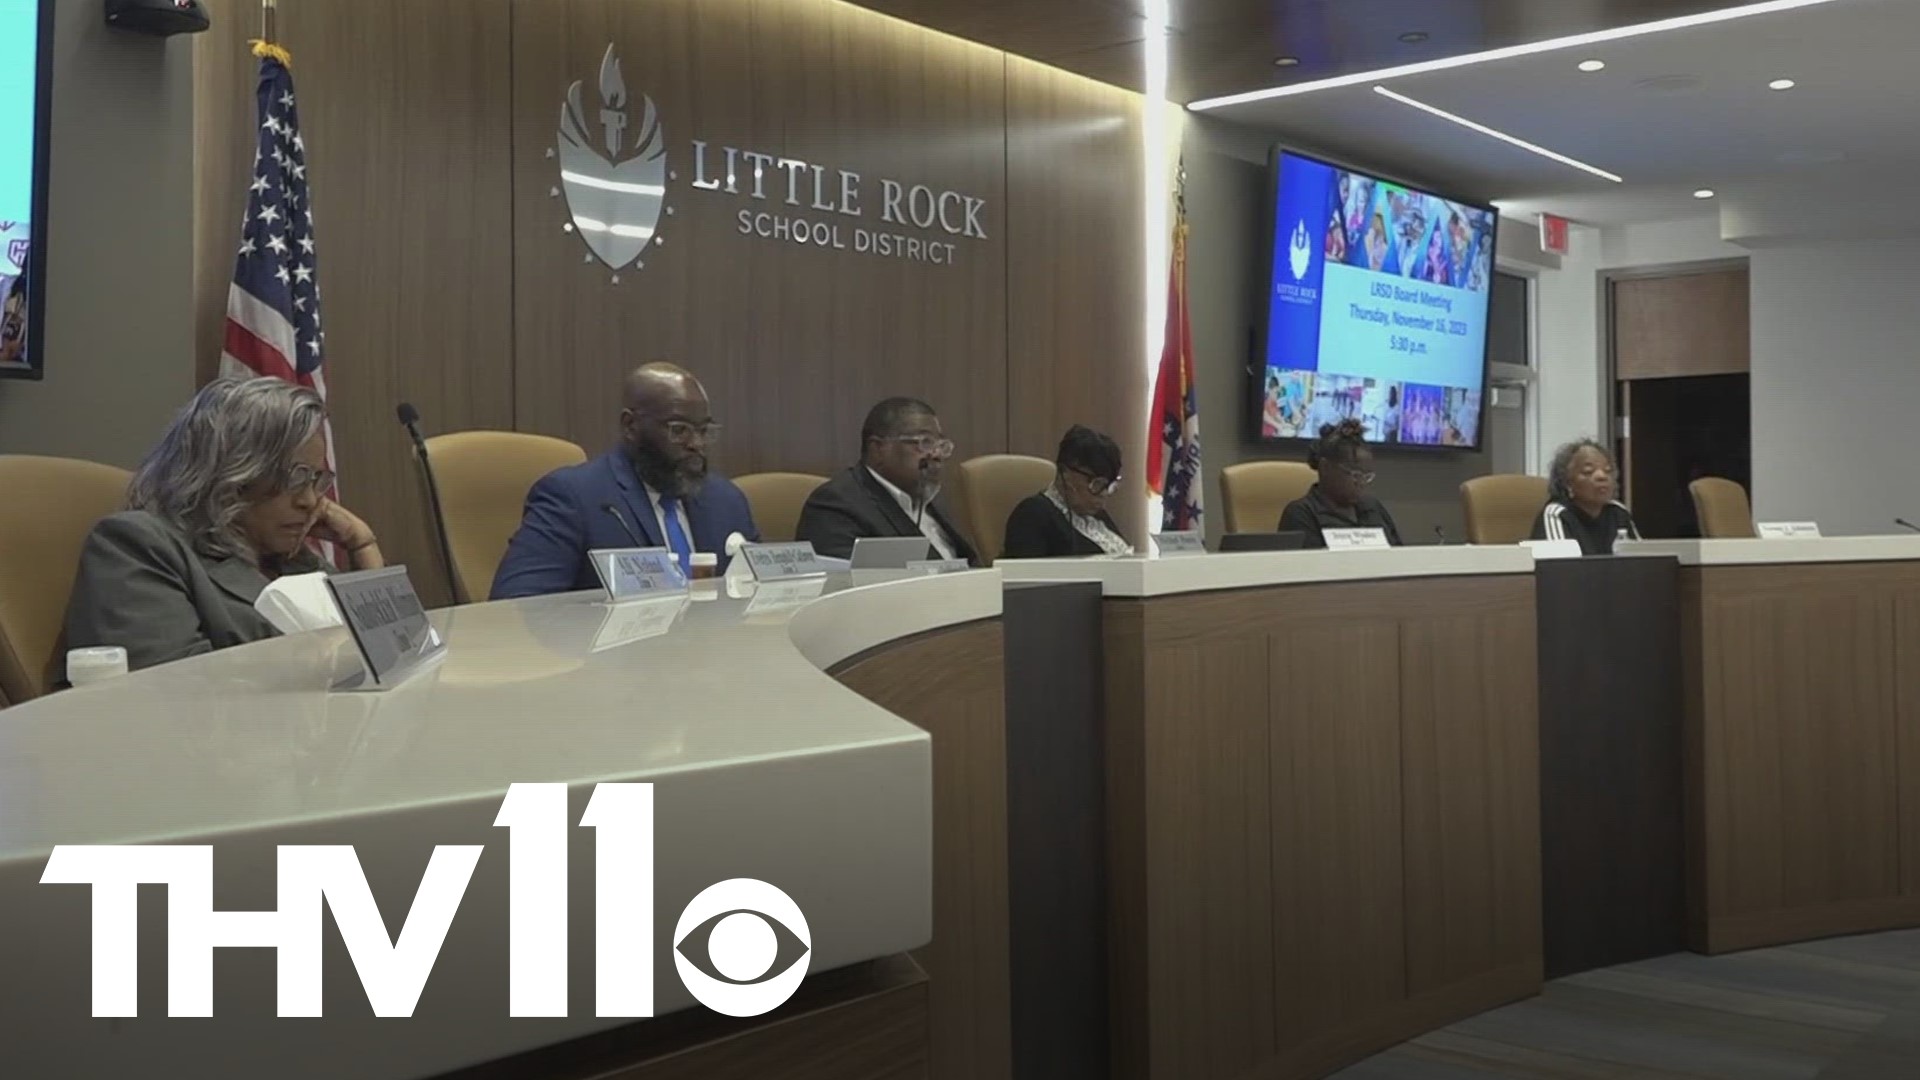 As LRSD officials look at the budget and decreasing enrollment there have been conversations about possibly needing to close a school within the district.